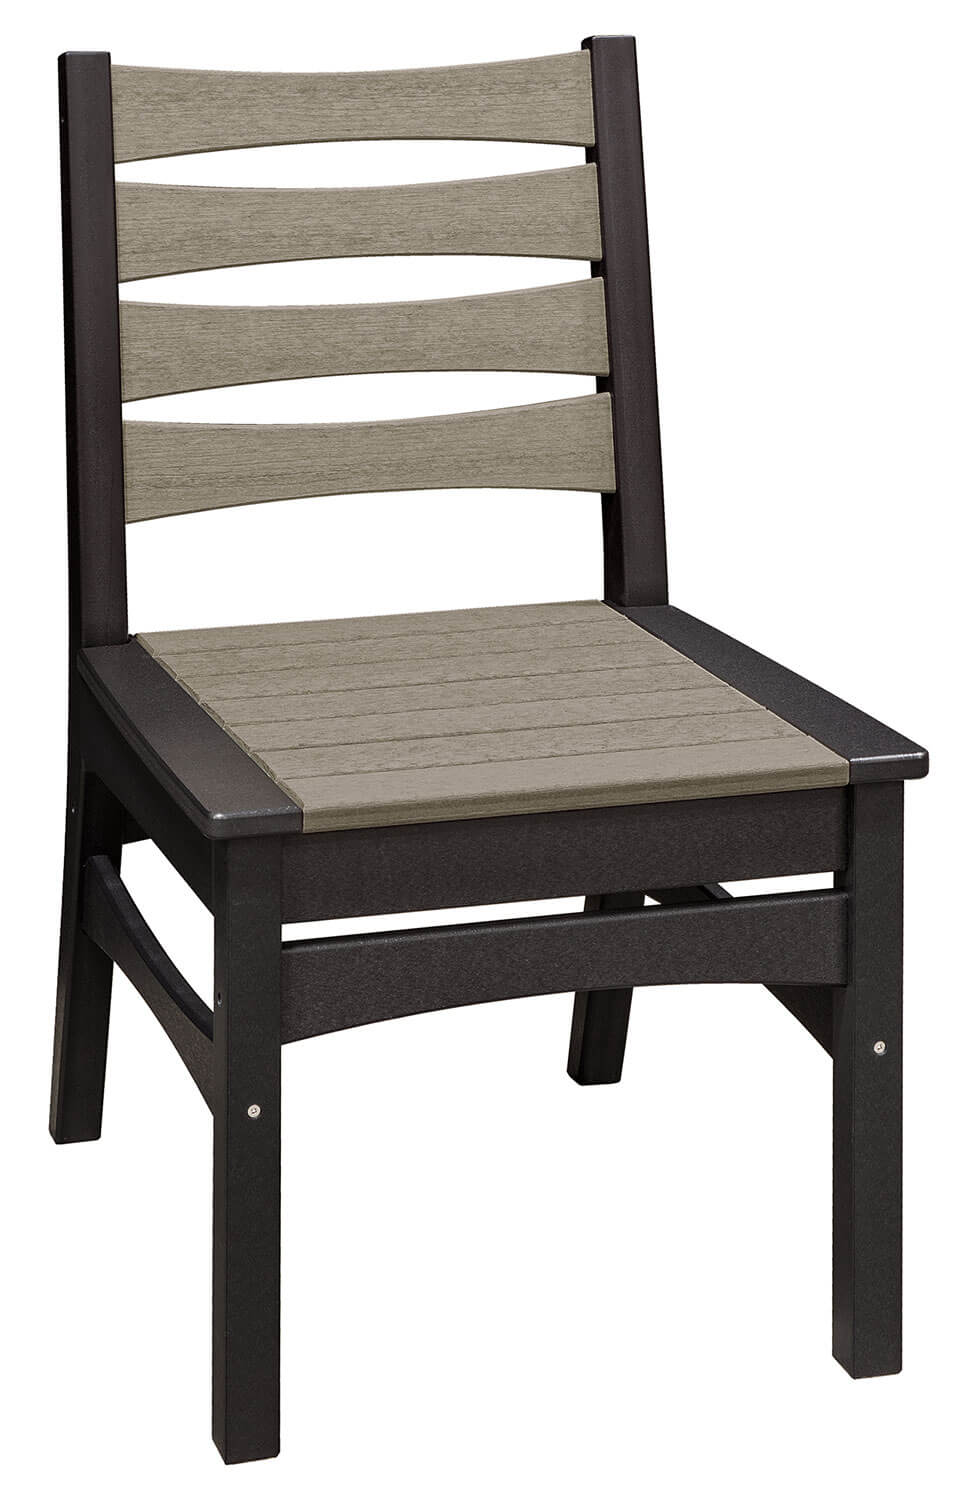 EC Woods Tacoma Outdoor Poly Dining Height Chair Shown in Drift Wood Gray and Black